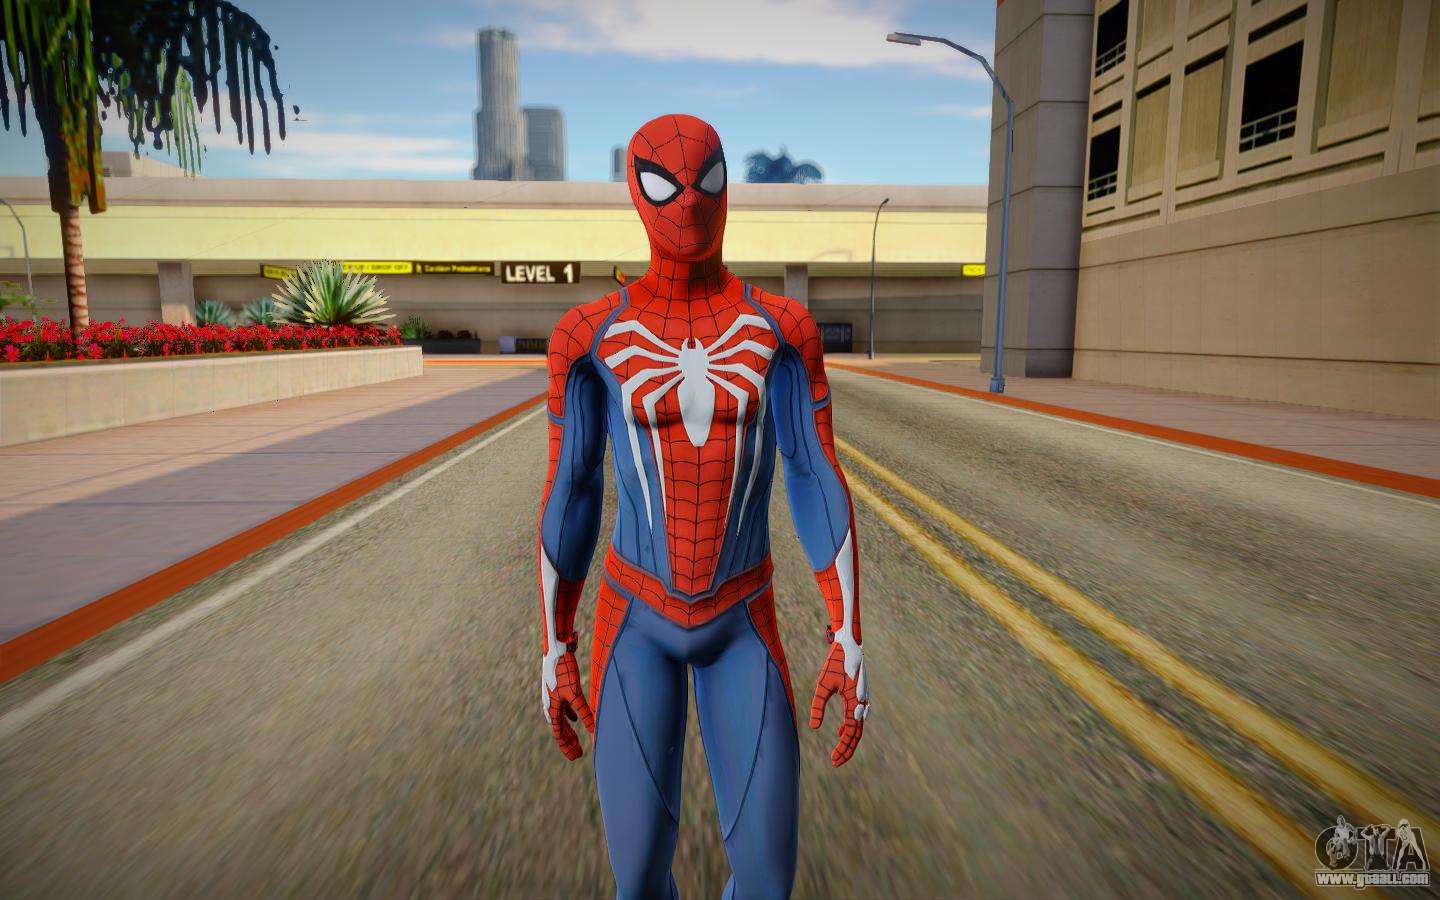 Spider-Man Advanced Suit from Spiderman PS4 for GTA San Andreas